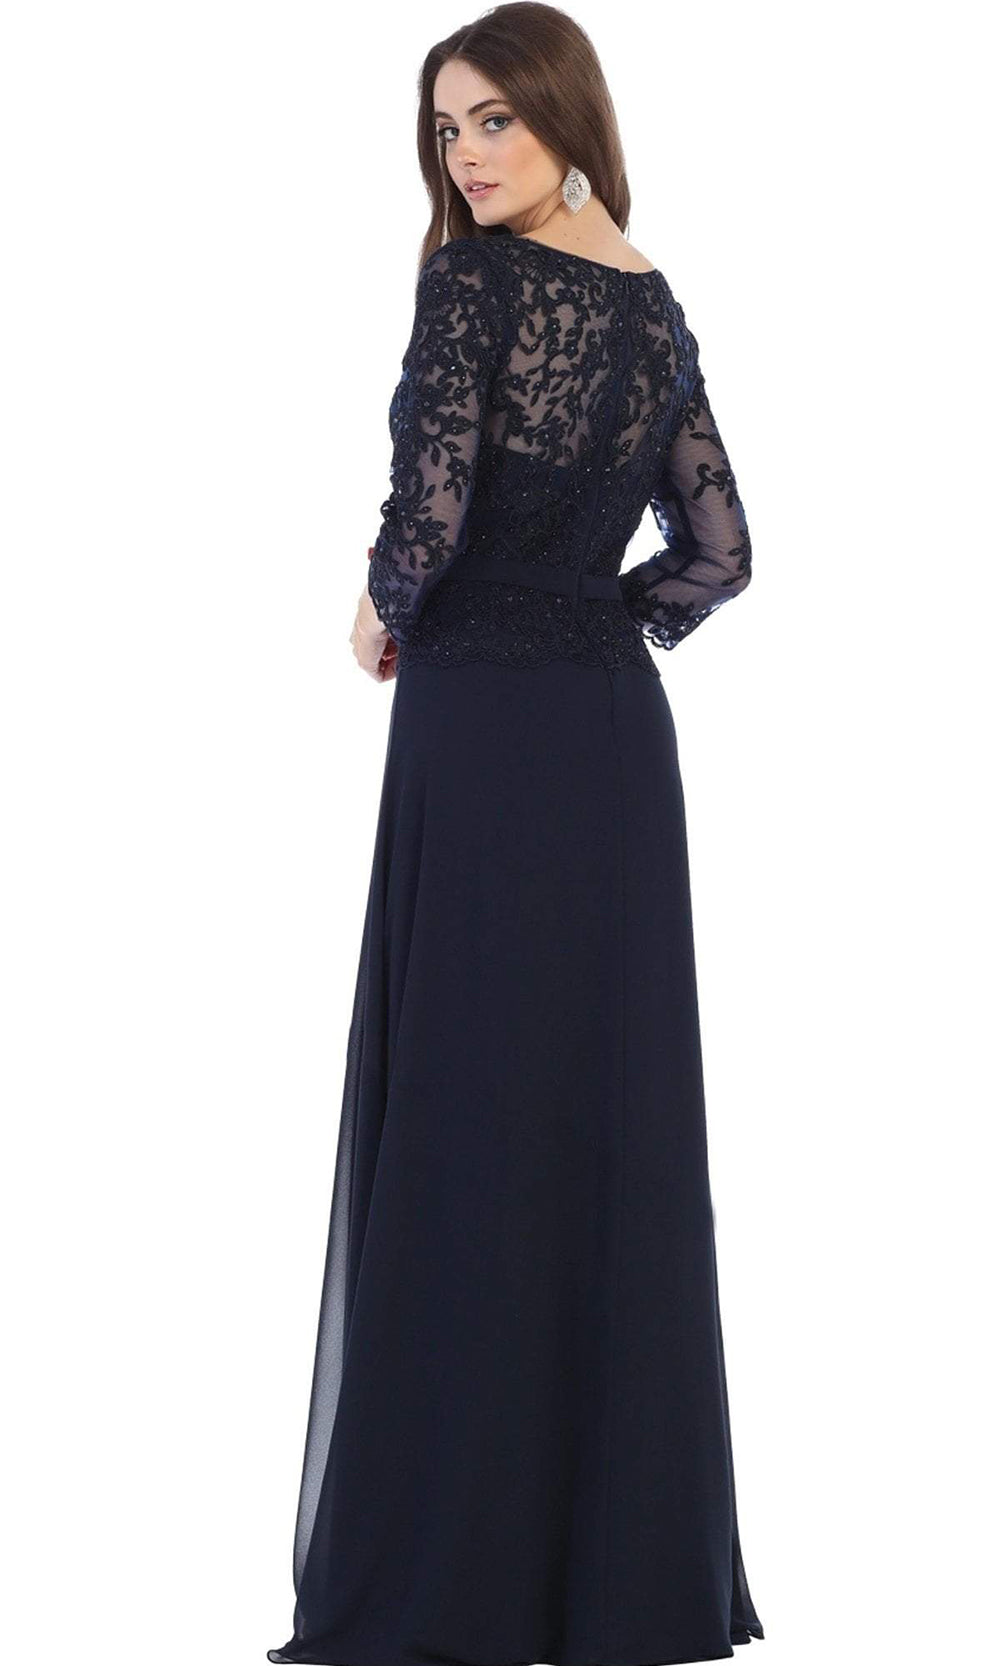 May Queen - Appliqued Illusion Bateau A-Line Dress MQ1599 - 1 pc Navy In Size 4XL Available CCSALE 2XL / Navy